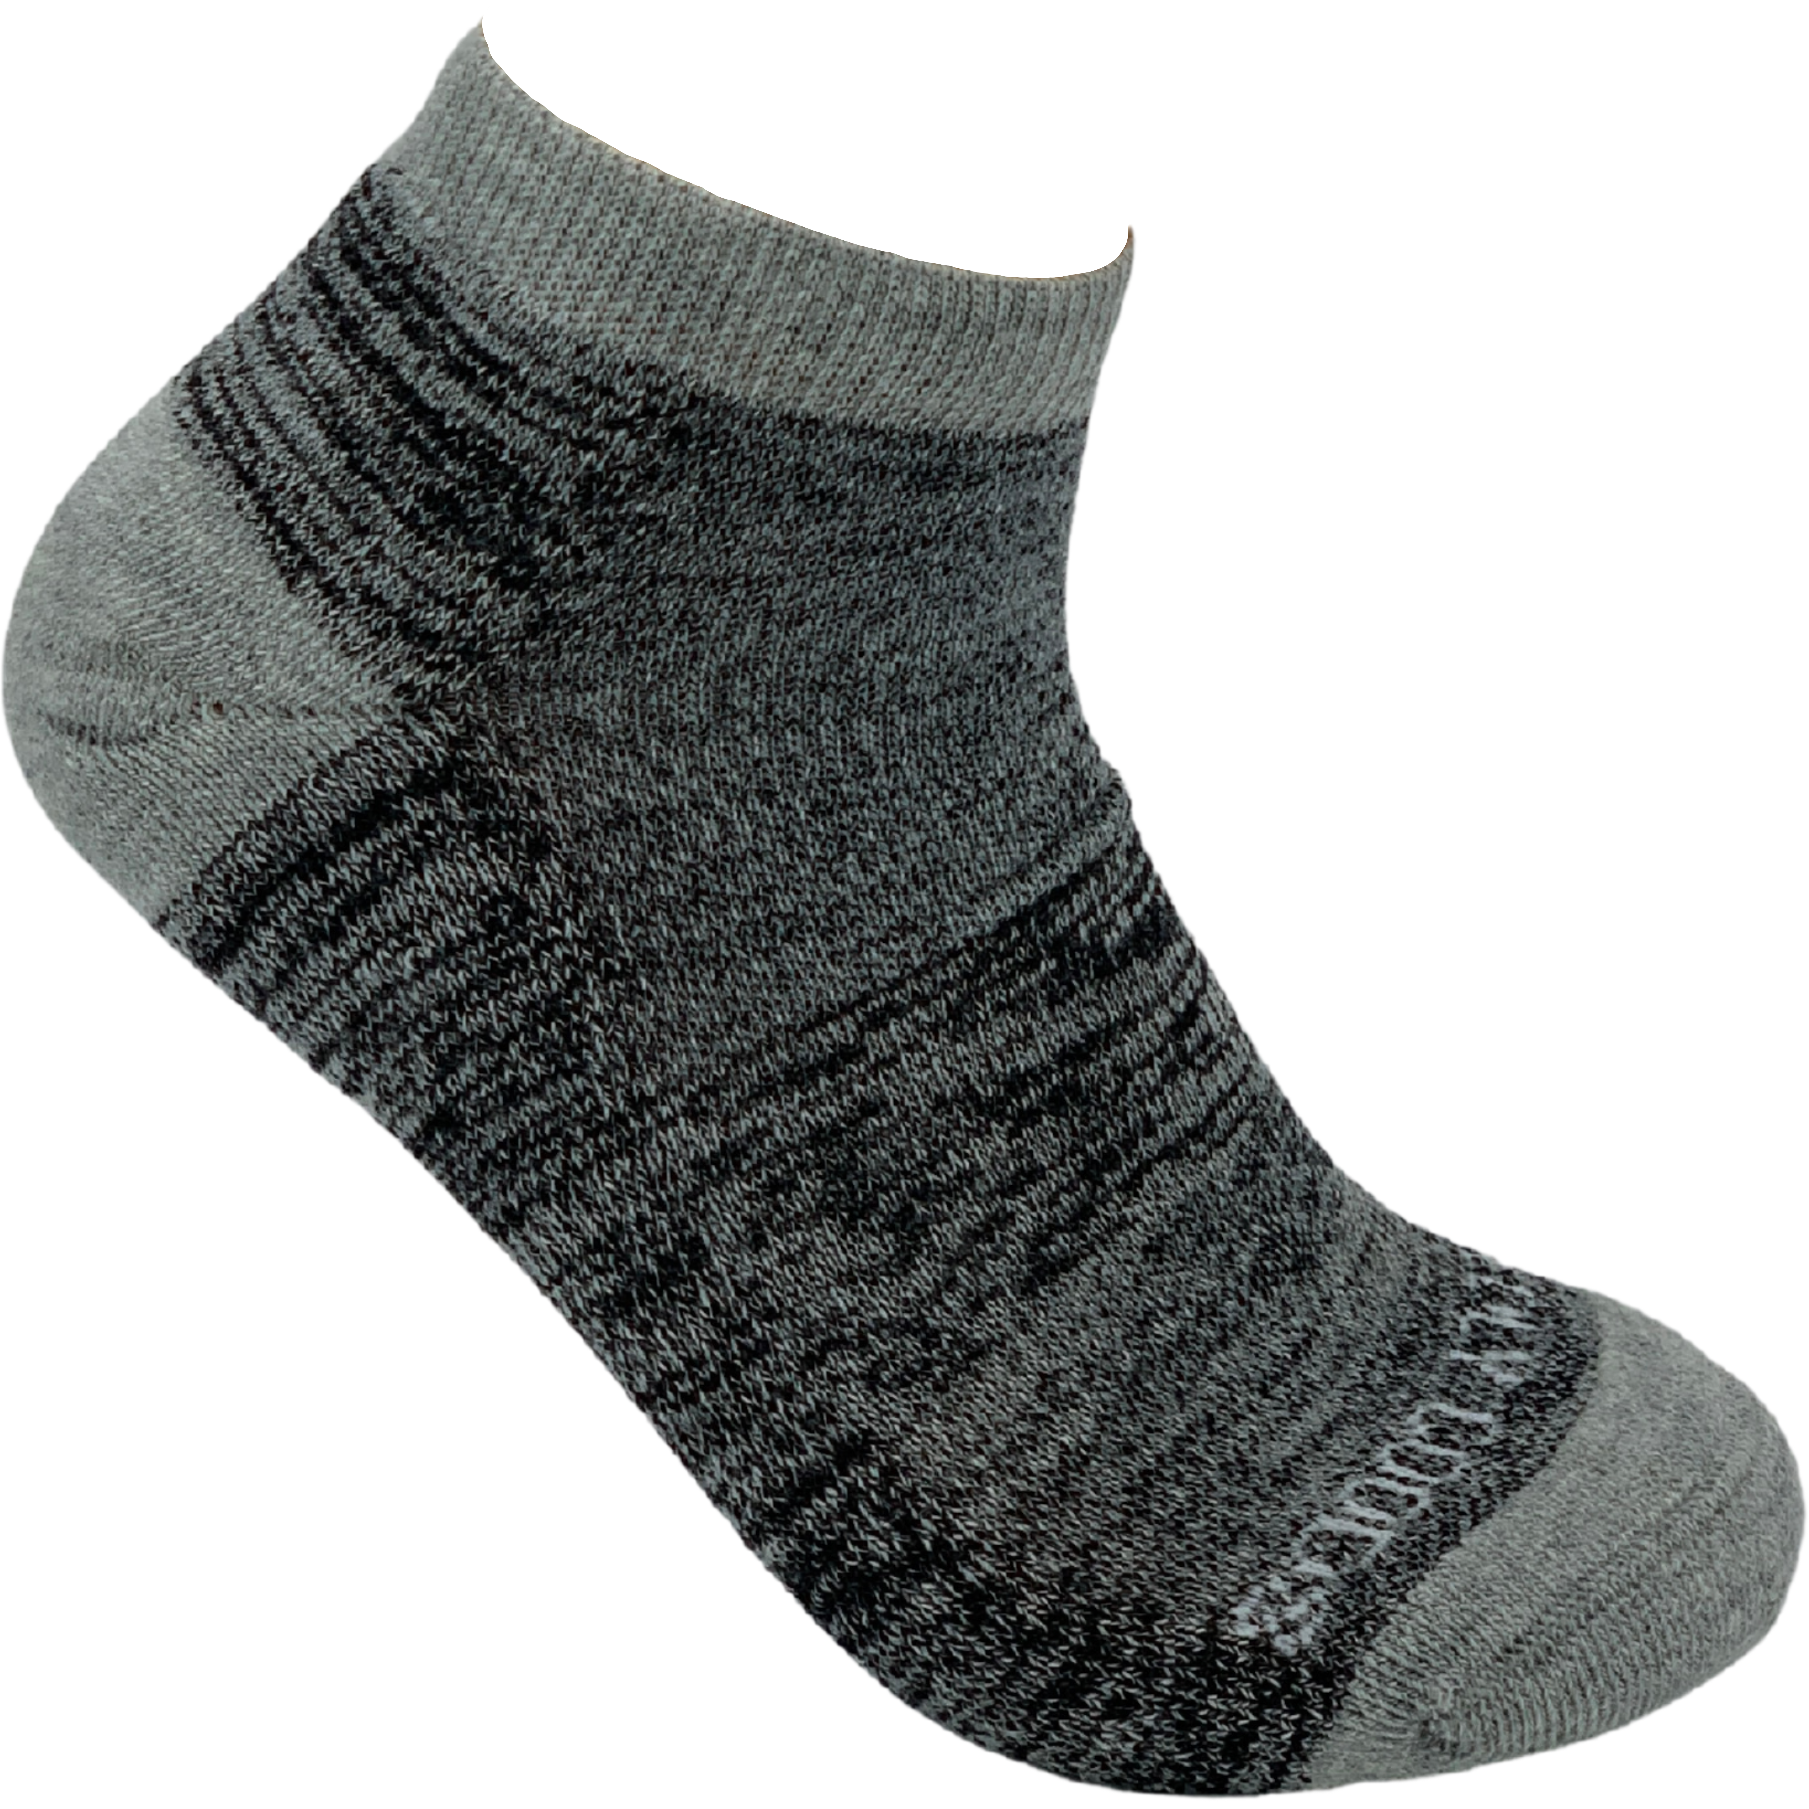 The most breathable socks for summer — BrightLife Direct